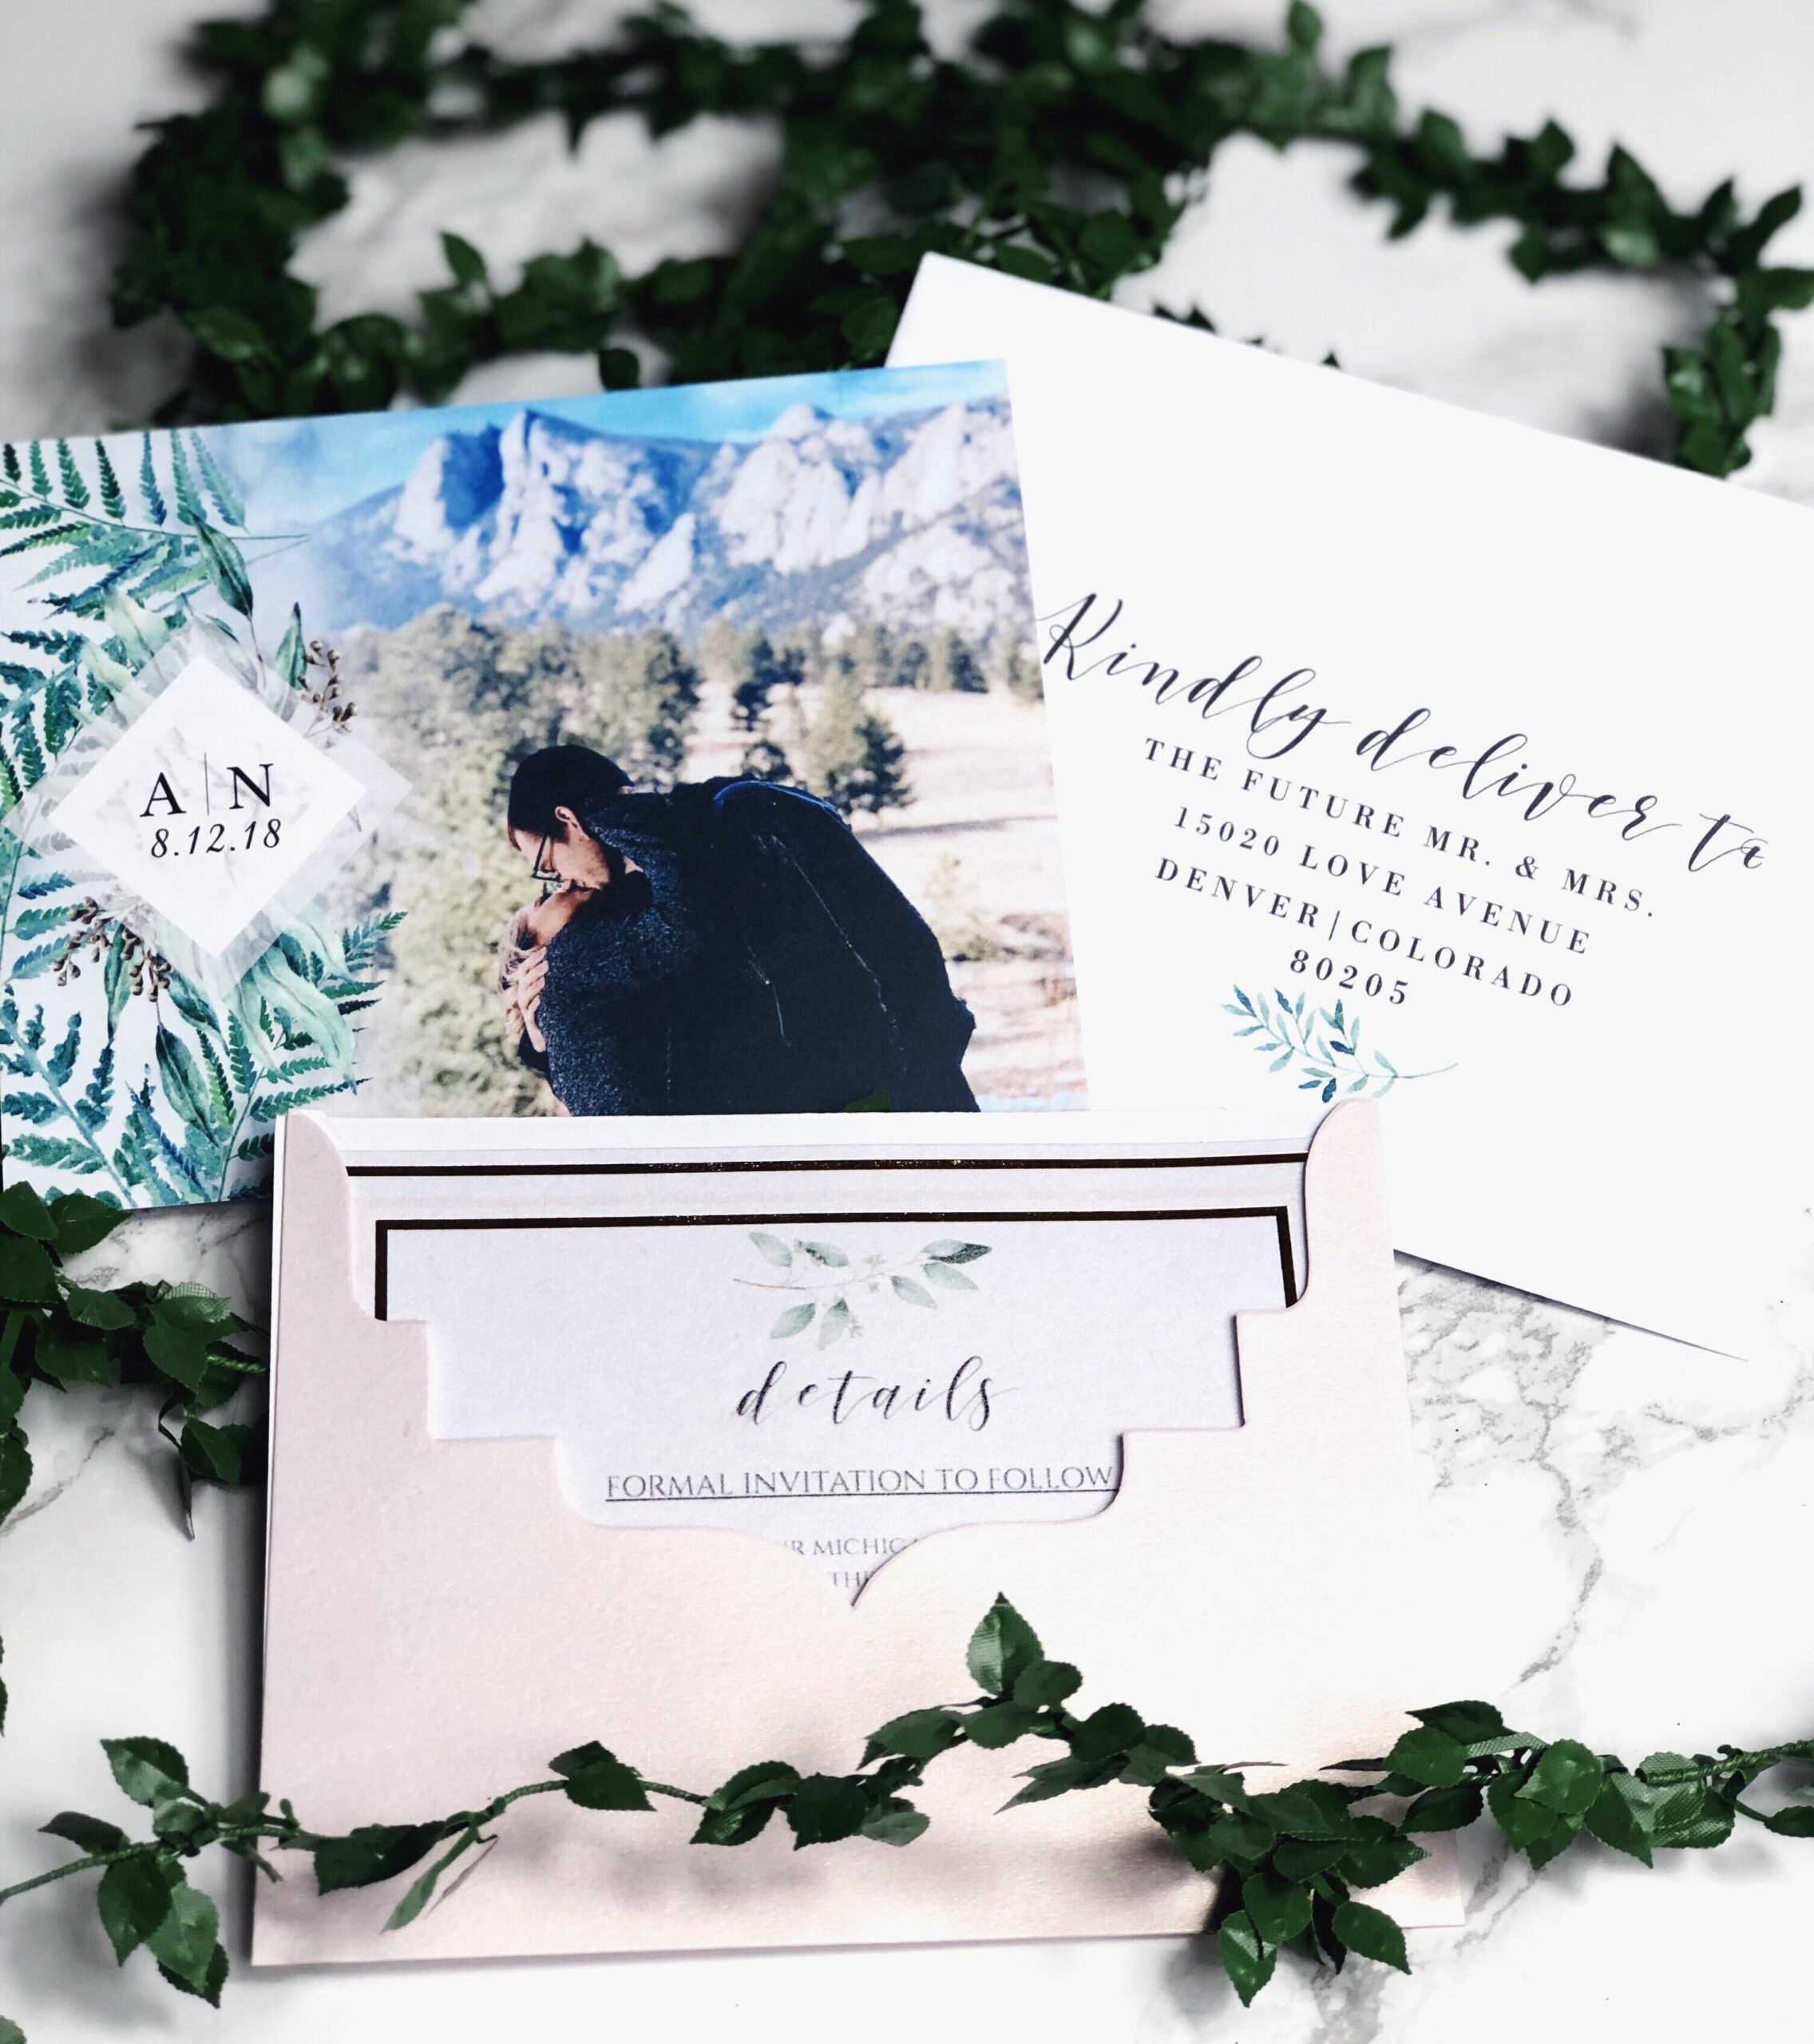 Our Save The Dates! Photo From Vistaprint, Envelope With Michaels Place Card Template